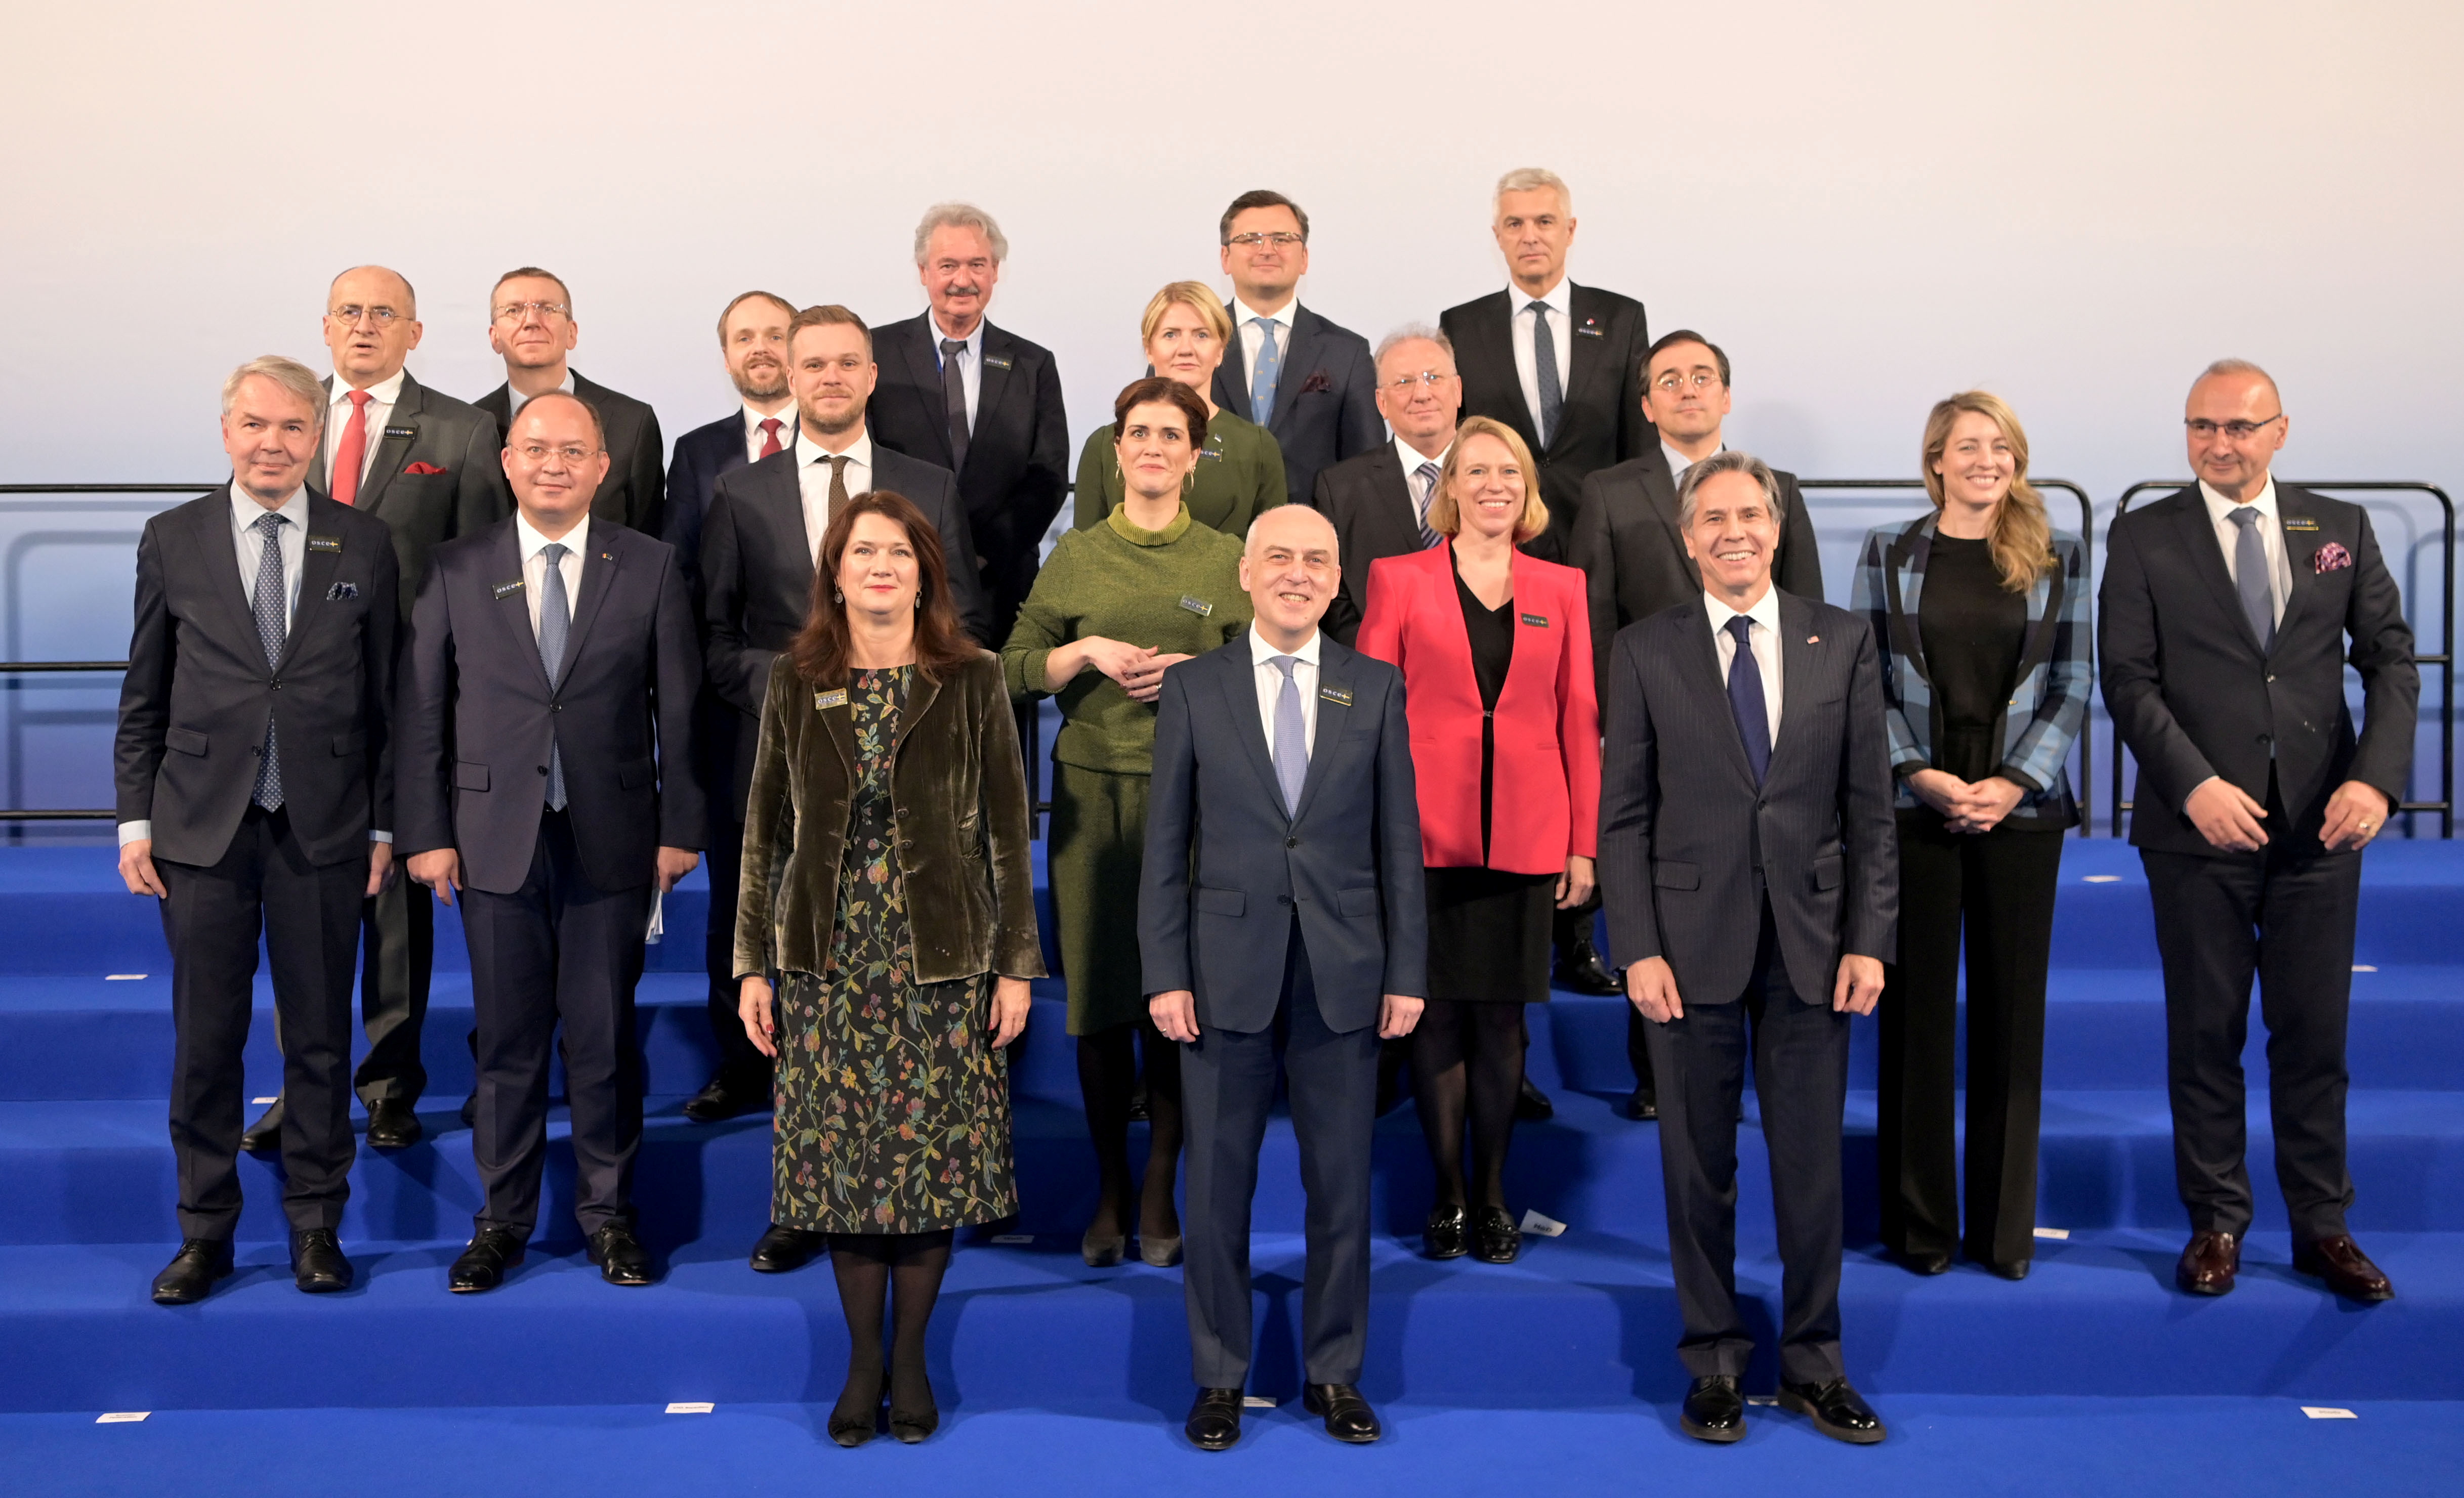 Participants pose for a family photo during a ministerial meeting of the Organisation for Security and Cooperation in Europe (OSCE) on December 2, 2021 in Stockholm, Sweden December 2, 2021. Jonathan Nackstrand/Pool via REUTERS